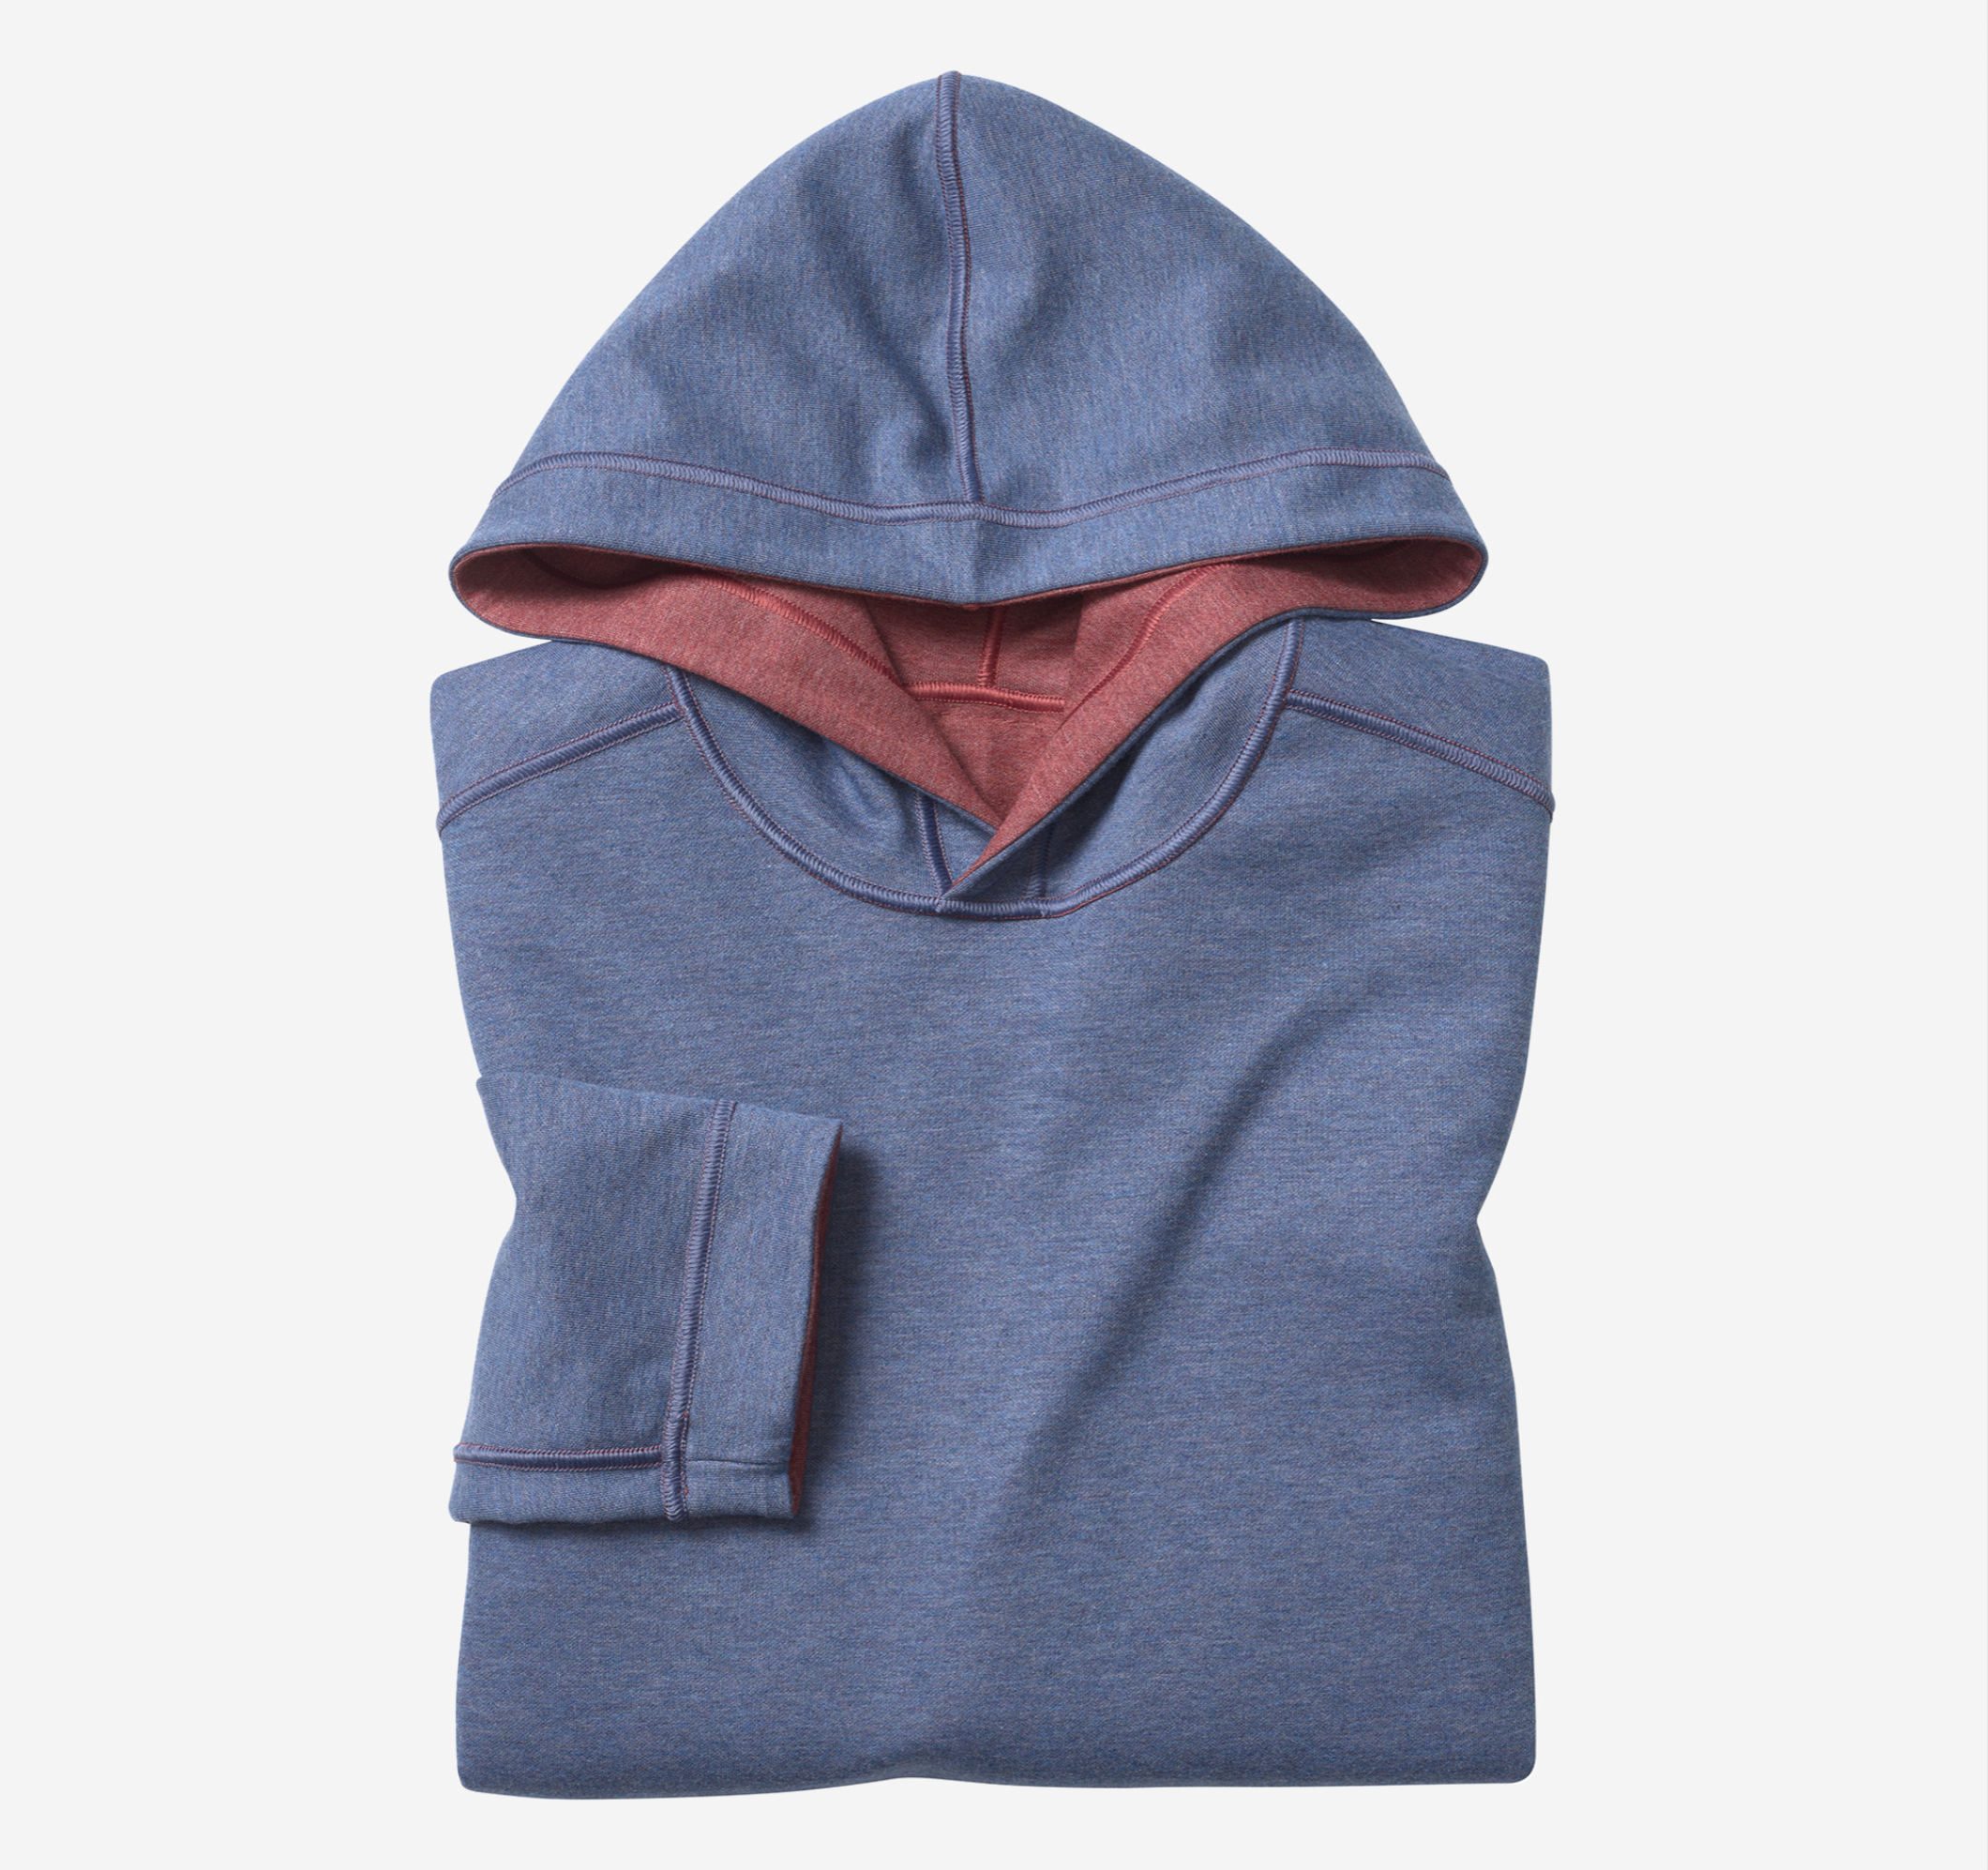 Stay warm and comfortable in style with the Johnston & Murphy Reversible Knit Hoodie. Crafted from a unique, reversible knit fabric, this hoodie offers dual looks to suit your mood.